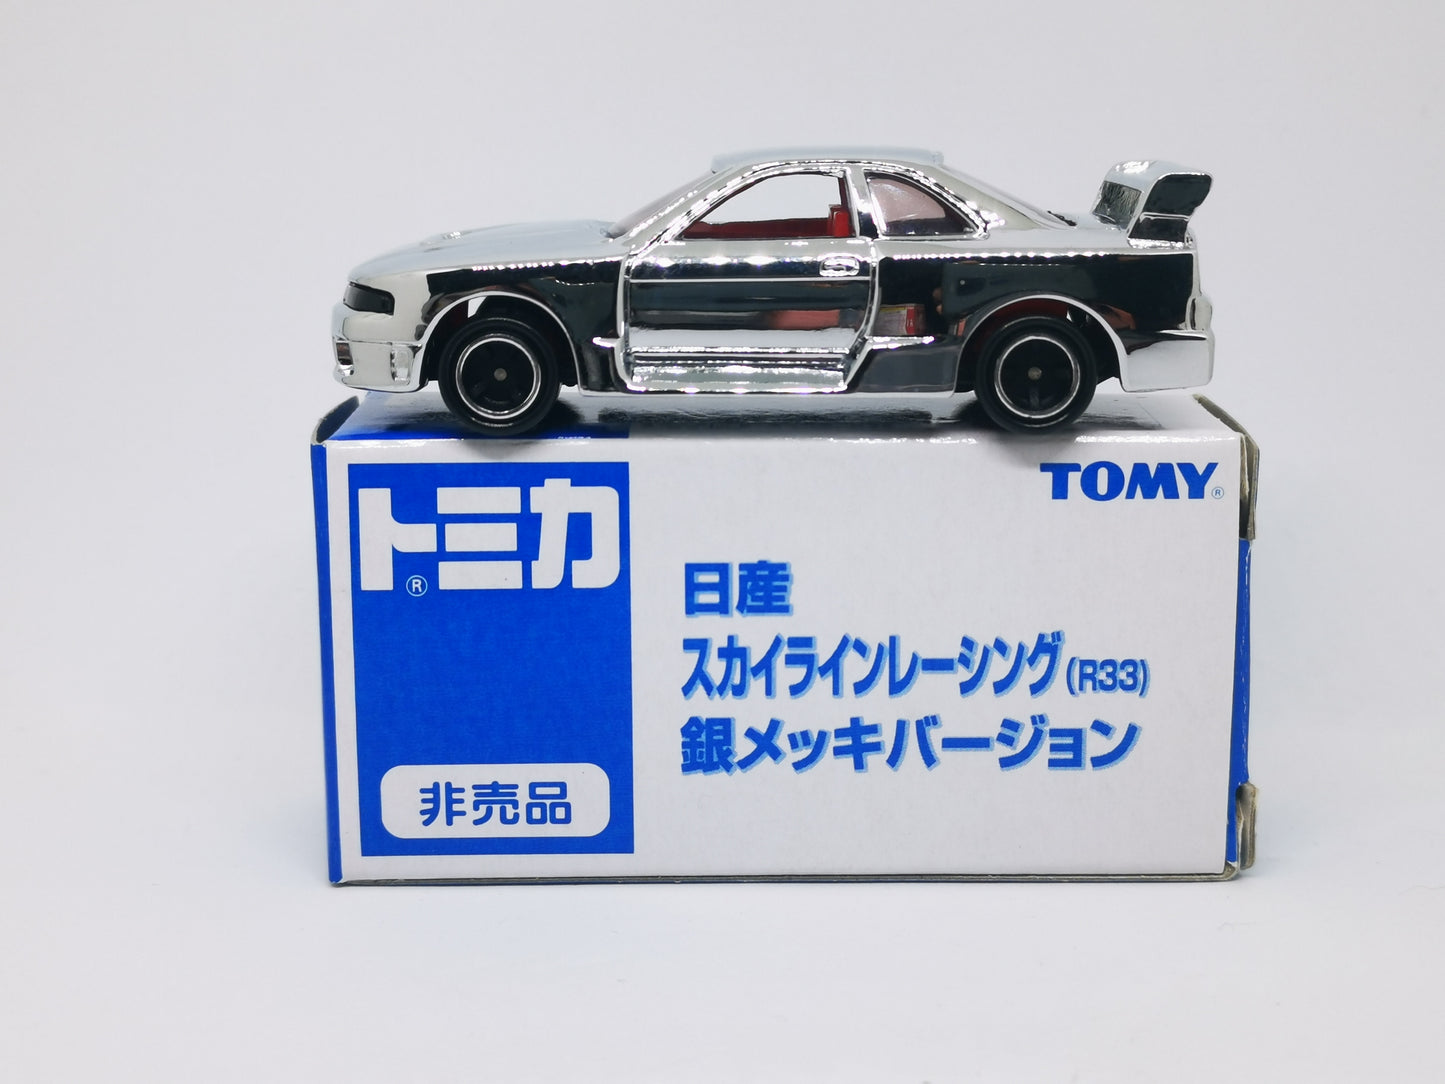 Tomica Expo Exclusive Nissan Skyline GT-R R33 Chrome